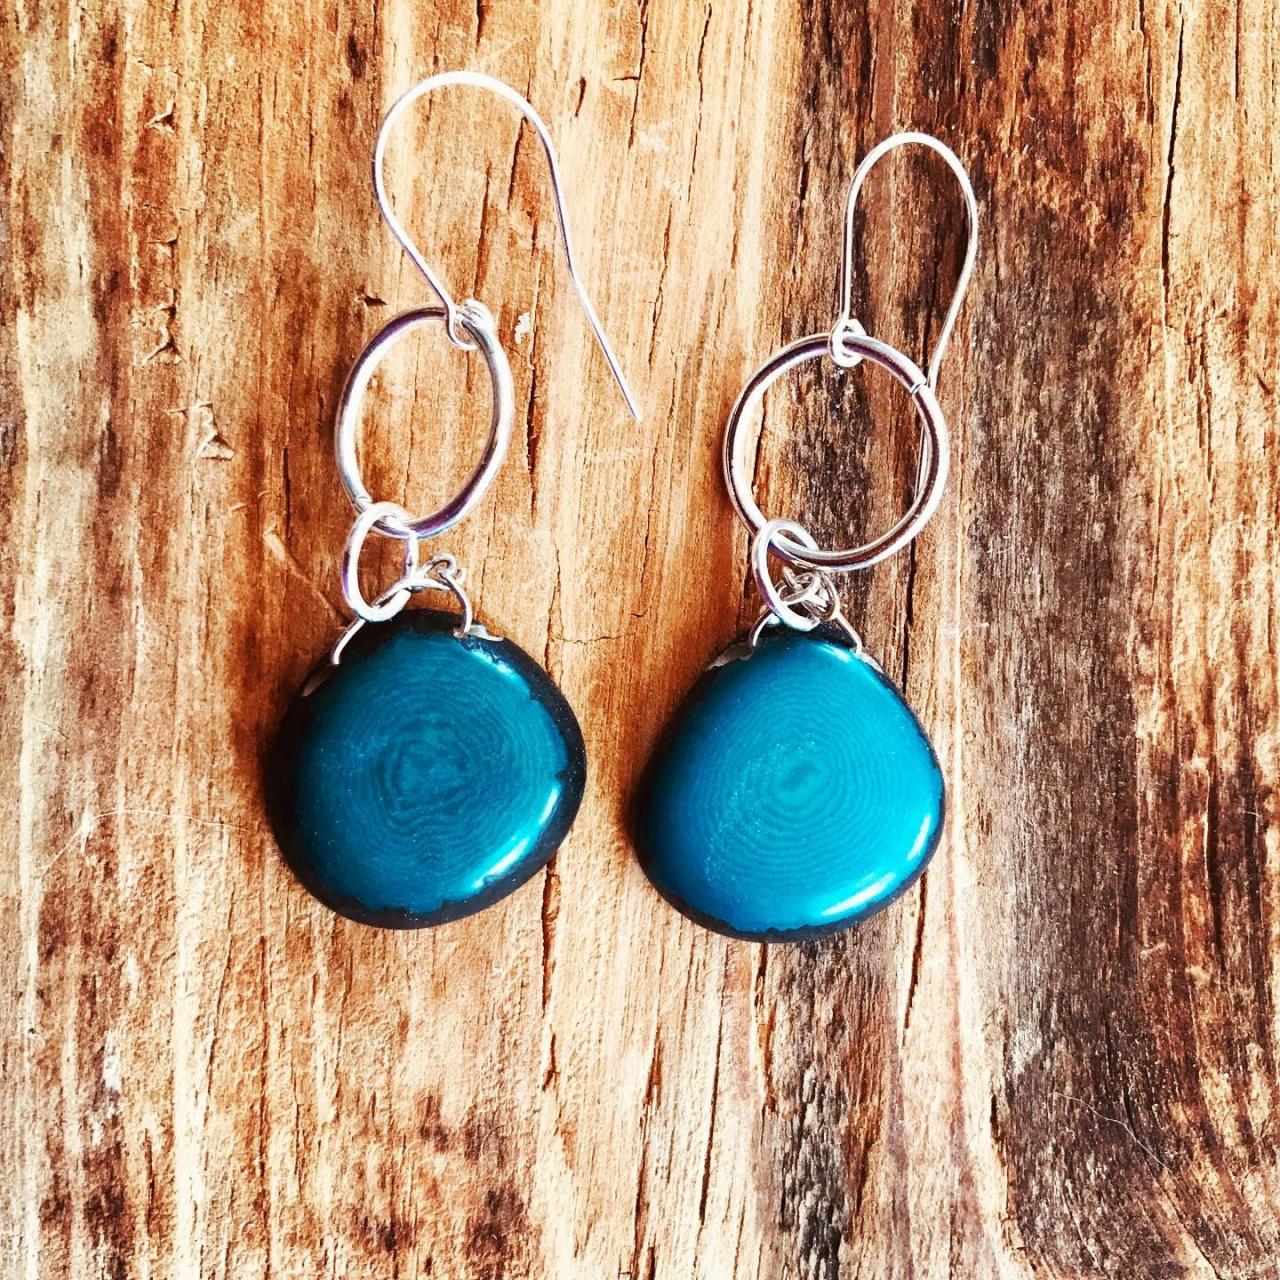 Gorgeous Turquoise Boho Tagua Nut Dangle Earrings With Sterling Silver Wires